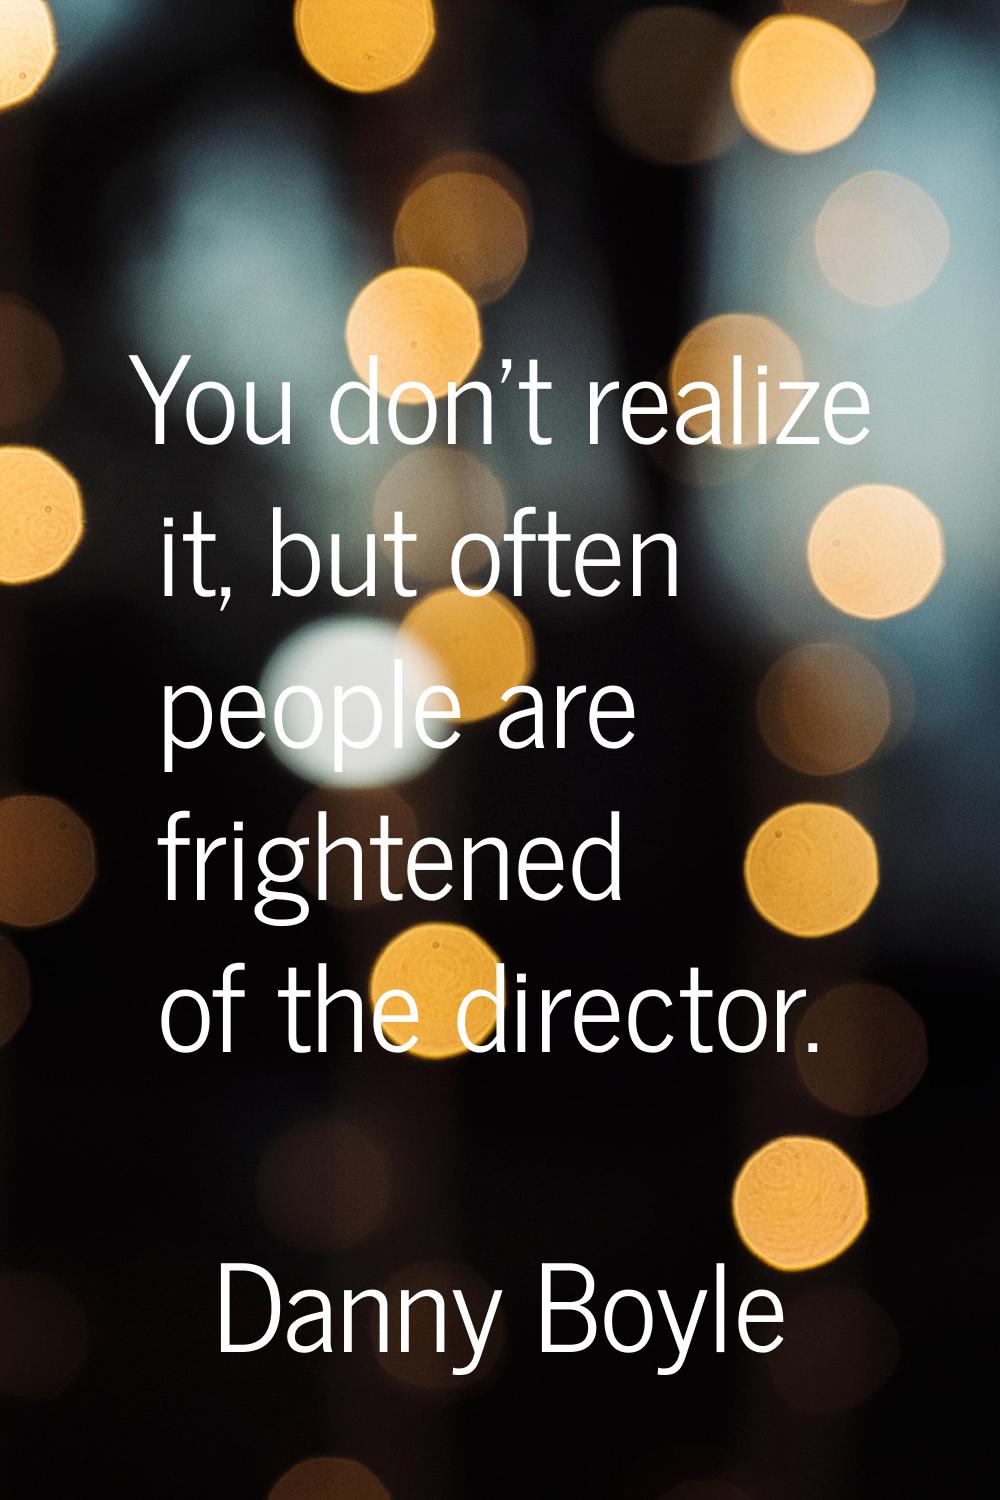 You don't realize it, but often people are frightened of the director.